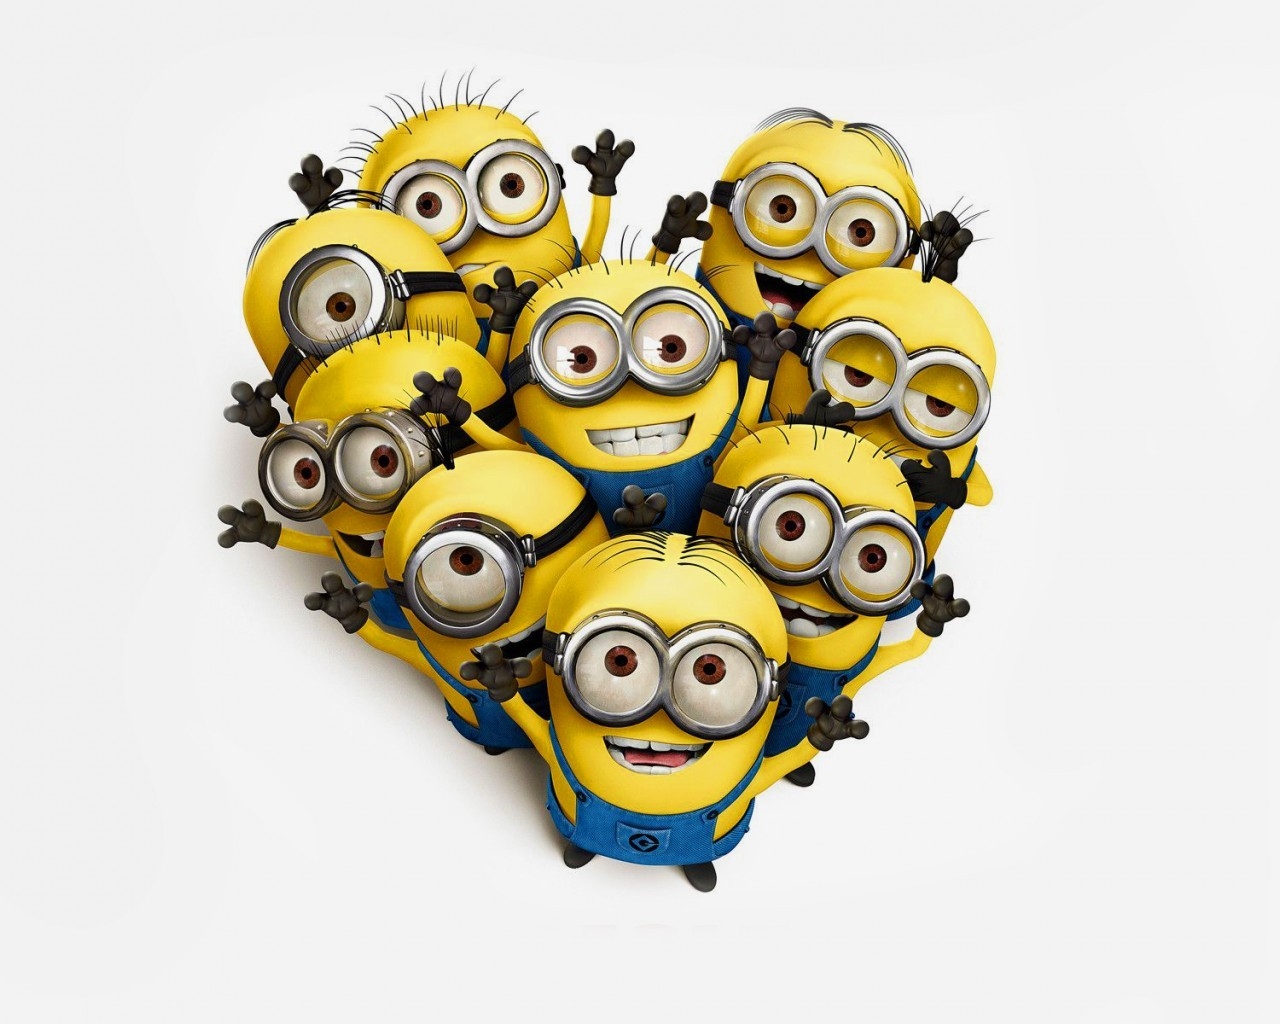 Despicable Me Film Poster for 1280 x 1024 resolution